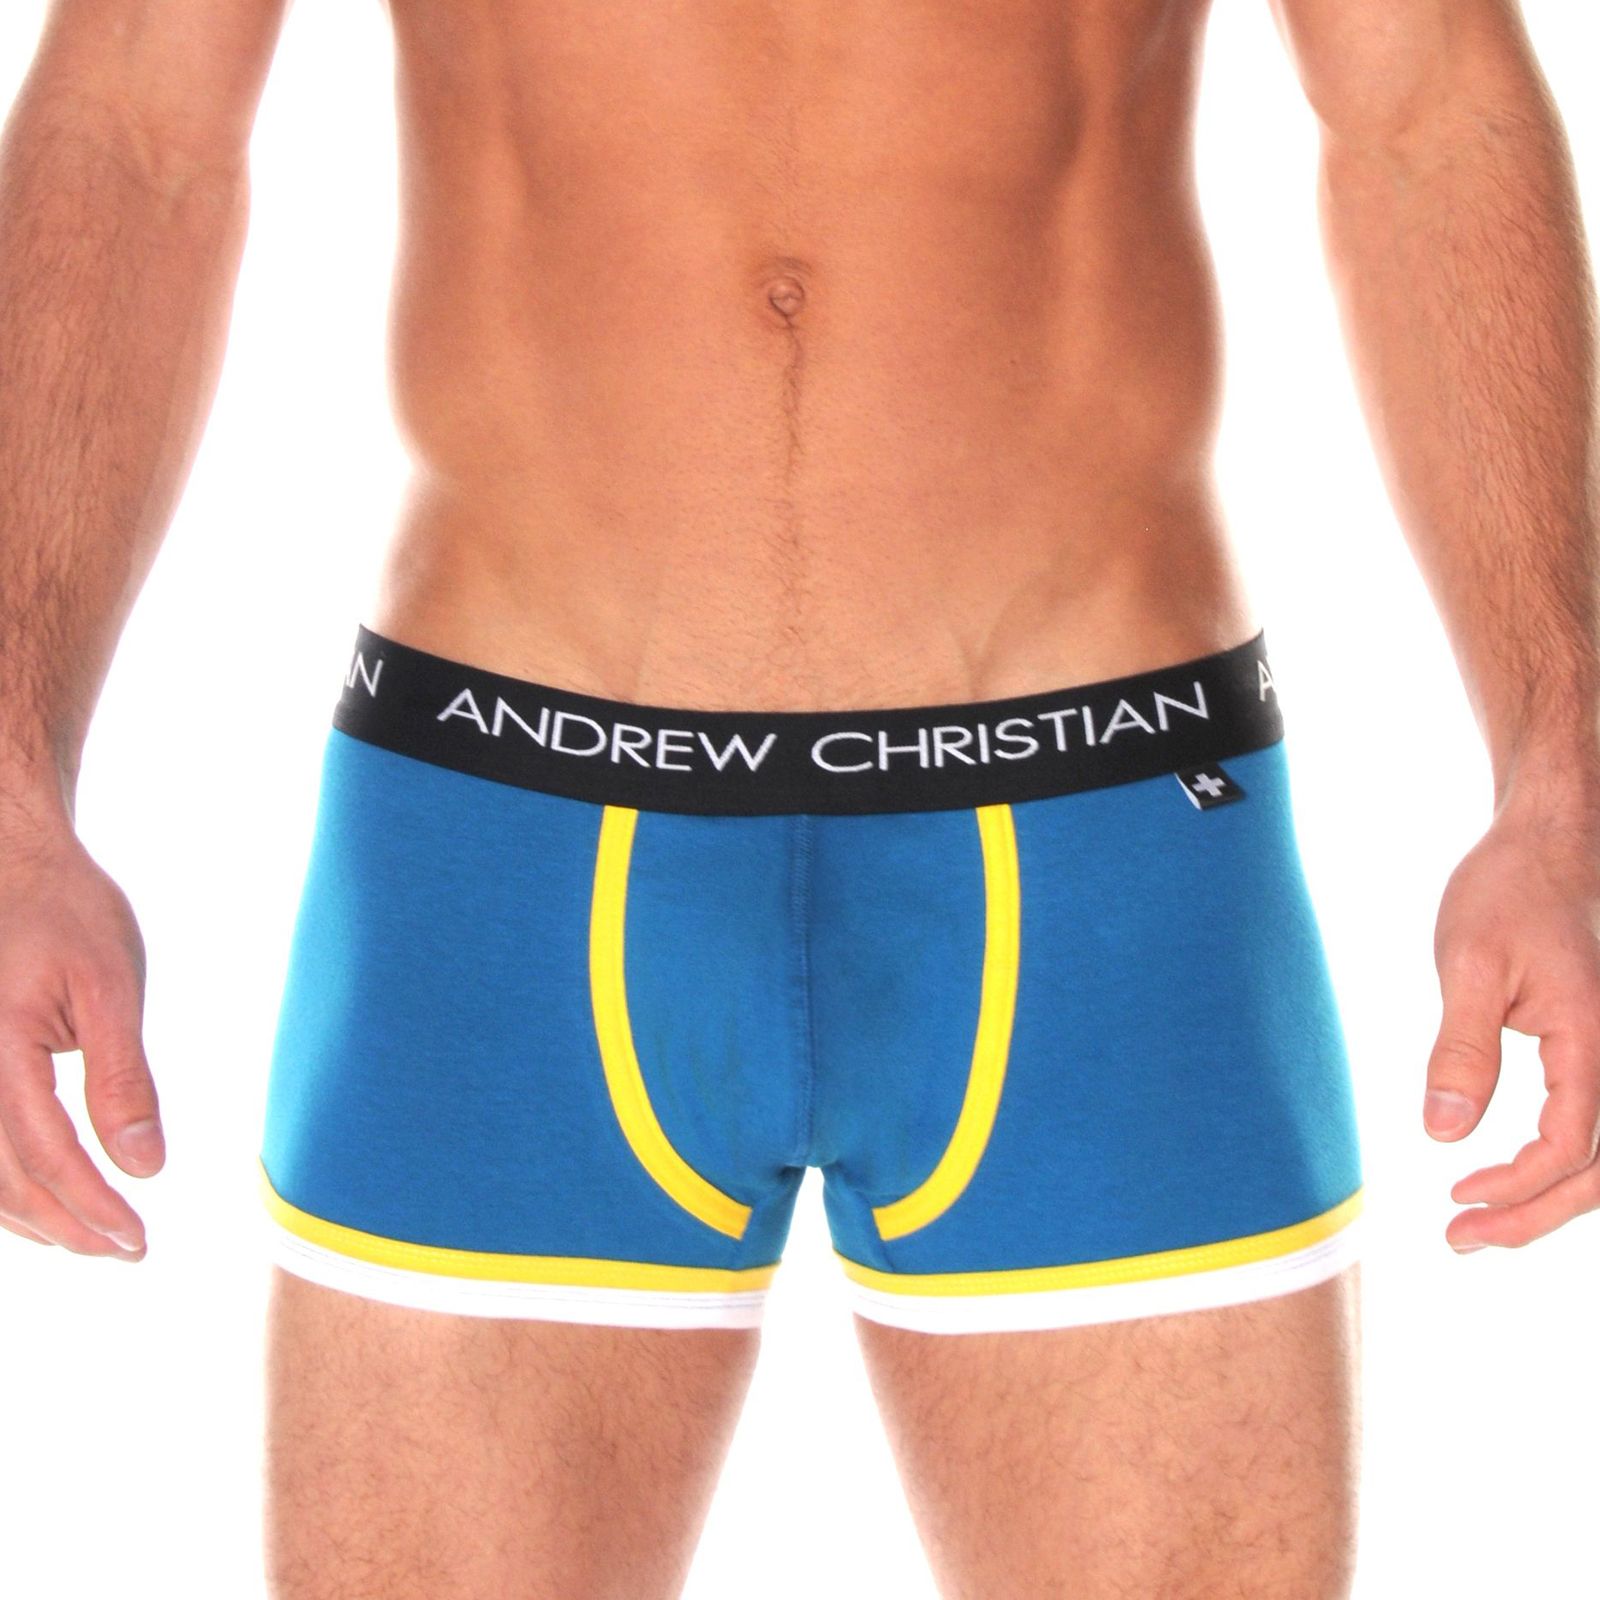 Boxer Brief Andrew Christian Show-it Flashlift 9282